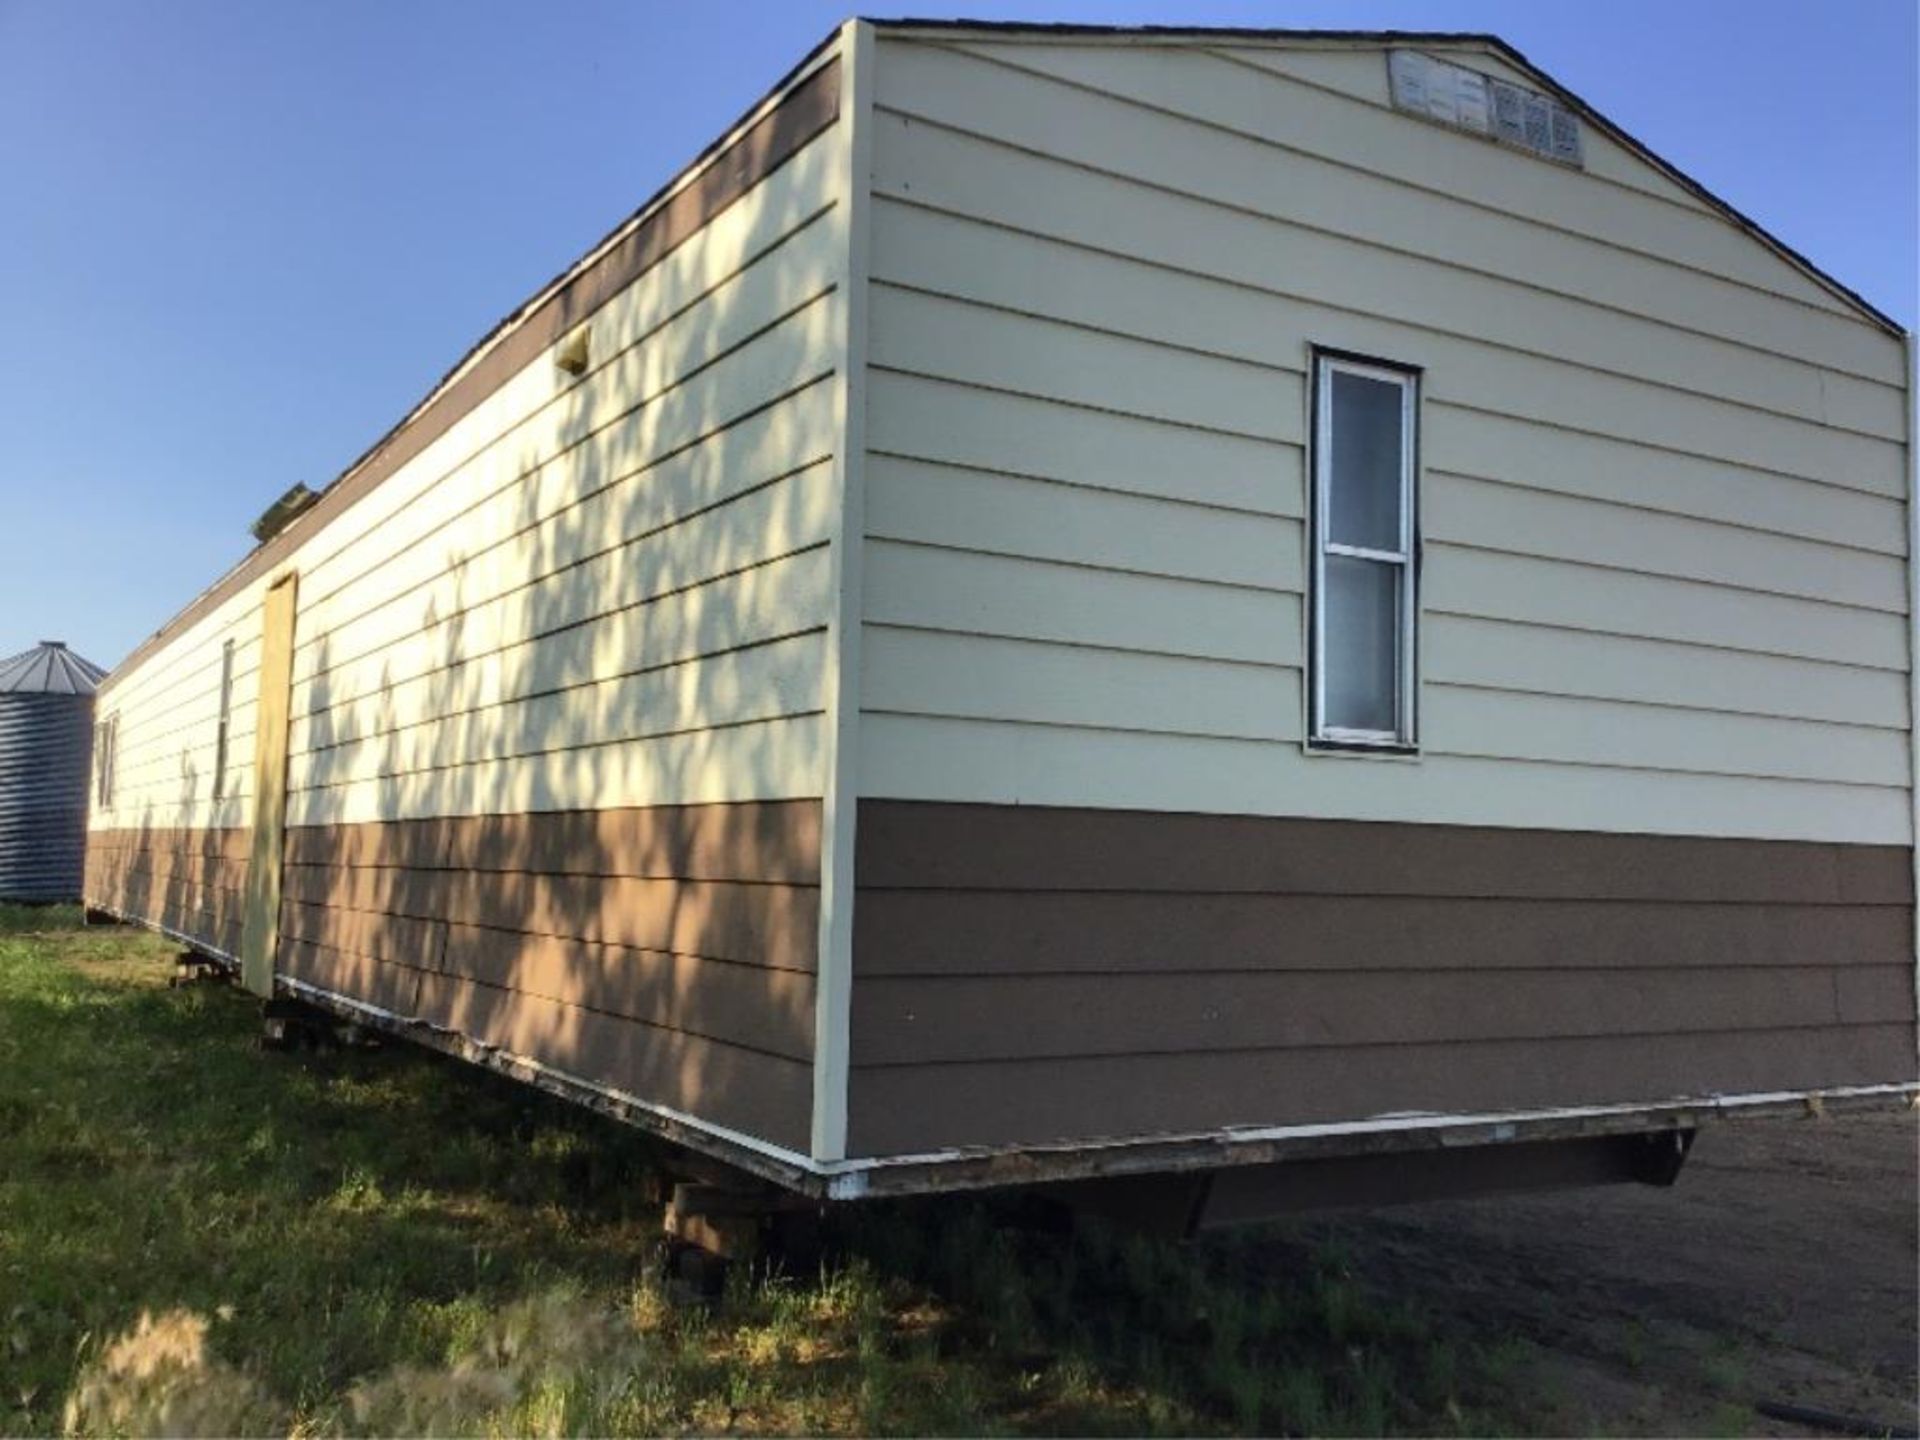 14ft x 68ft 2-Bedroom Mobile Home Kitchen Front, Fireplace in Living Room, Master Ensuite, Ext Tin - Image 4 of 22